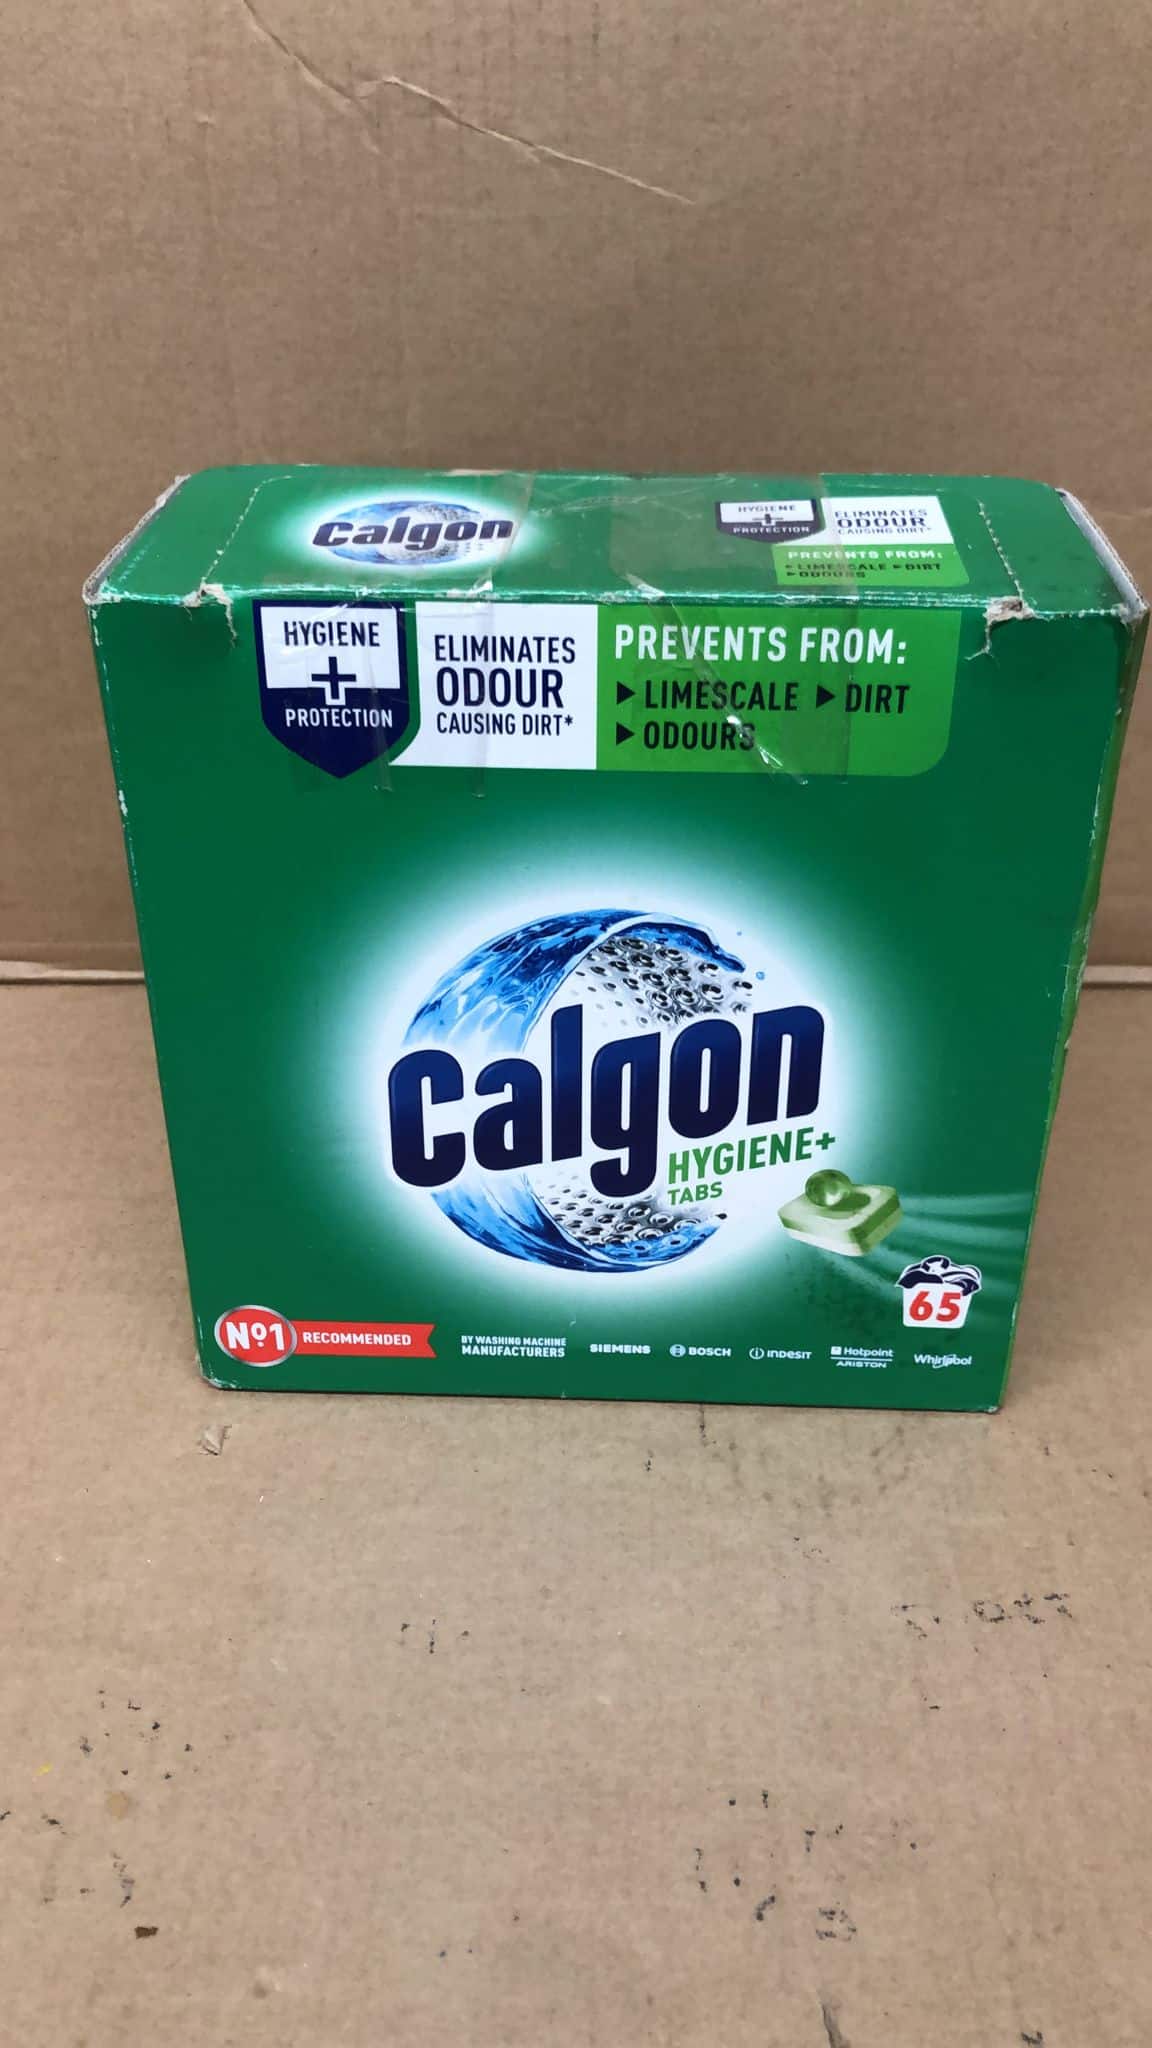 Calgon Hygiene Plus Water Softener Tablets-Washing Machine Cleaner & Limescale Remover-0032 (51 Capsules)